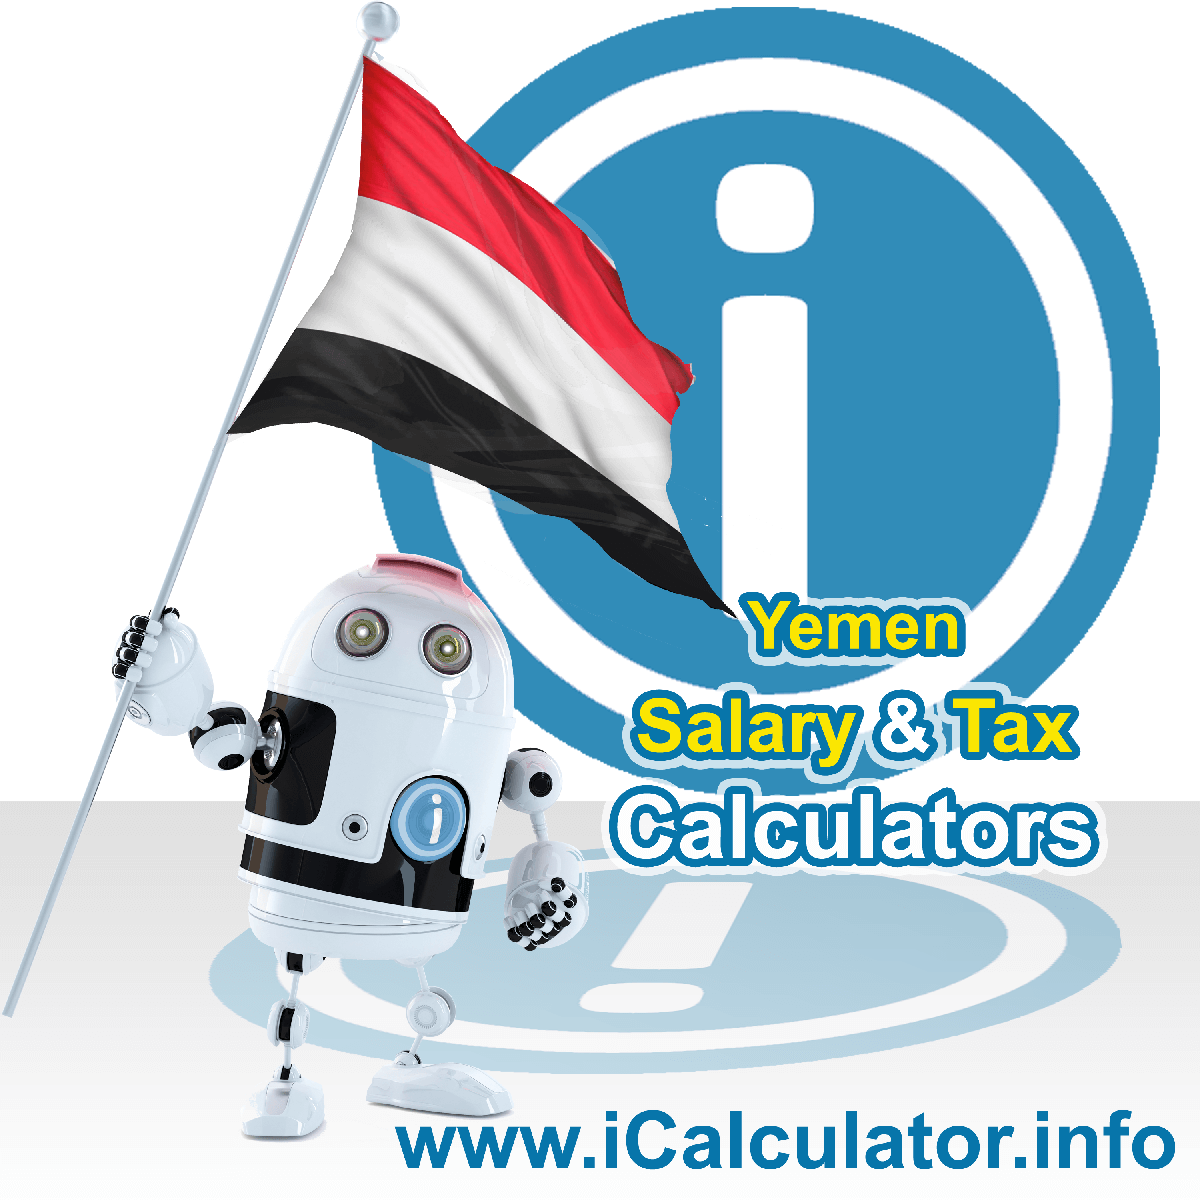 Yemen Tax Calculator. This image shows the Yemen flag and information relating to the tax formula for the Yemen Salary Calculator